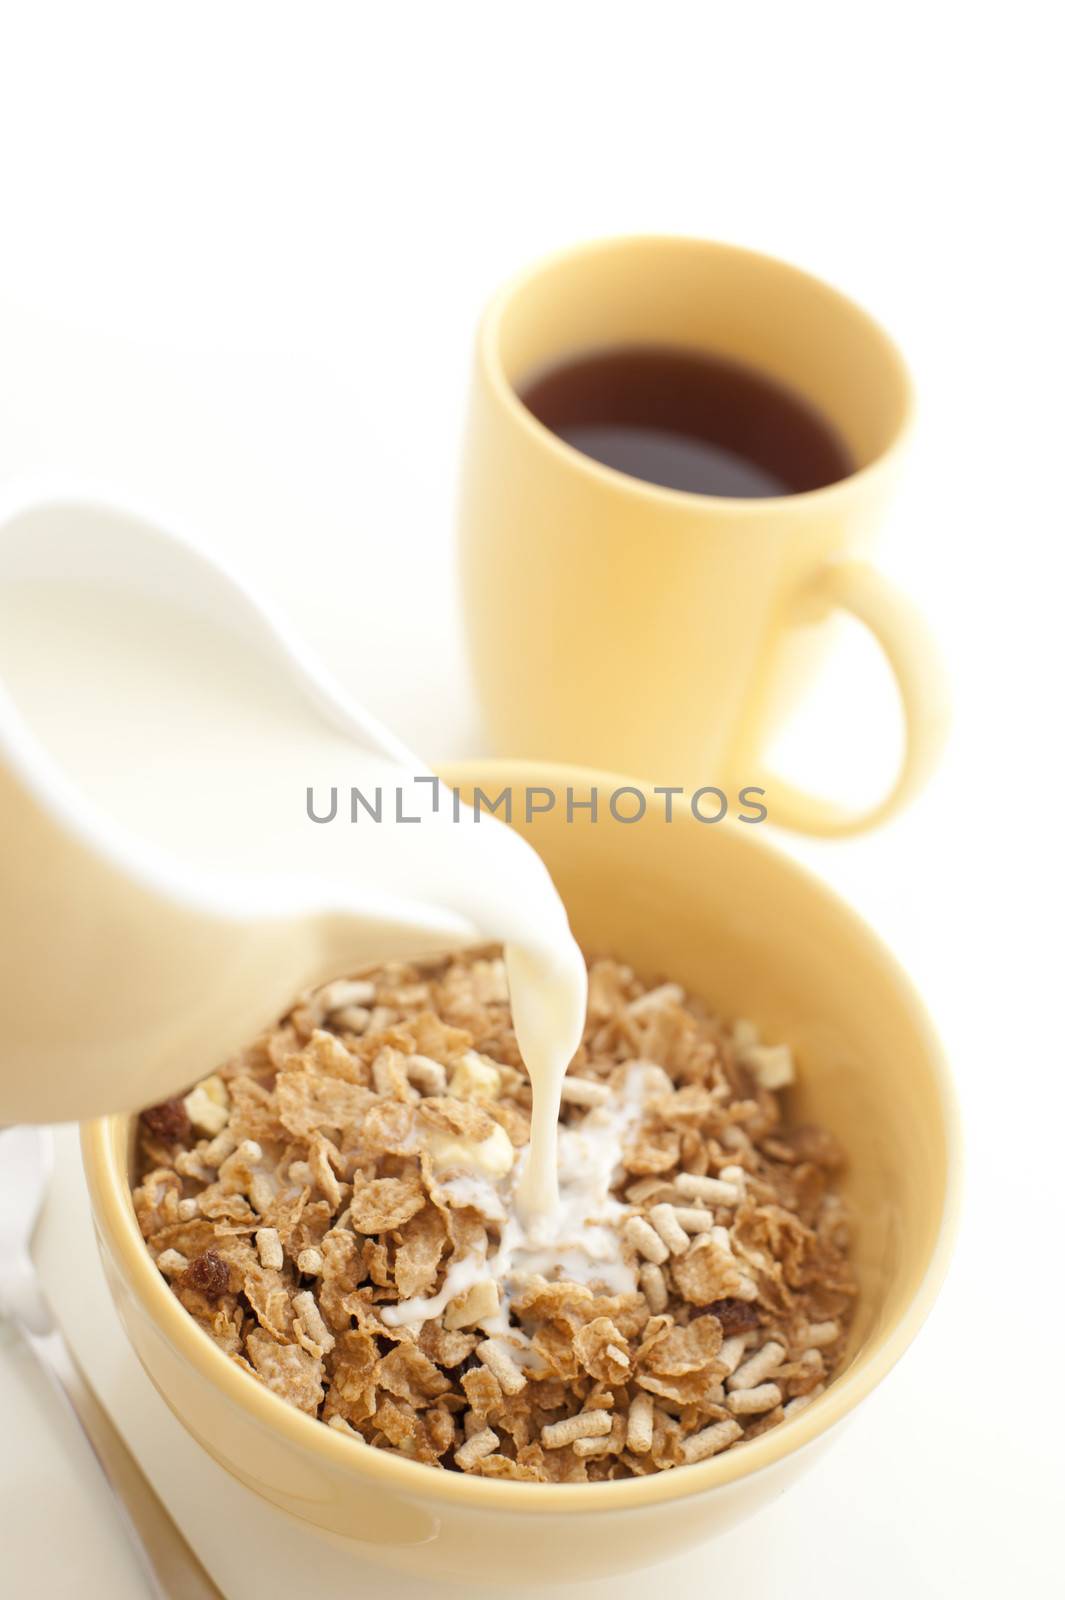 Pouring milk into breakfast cereal - high key by stockarch